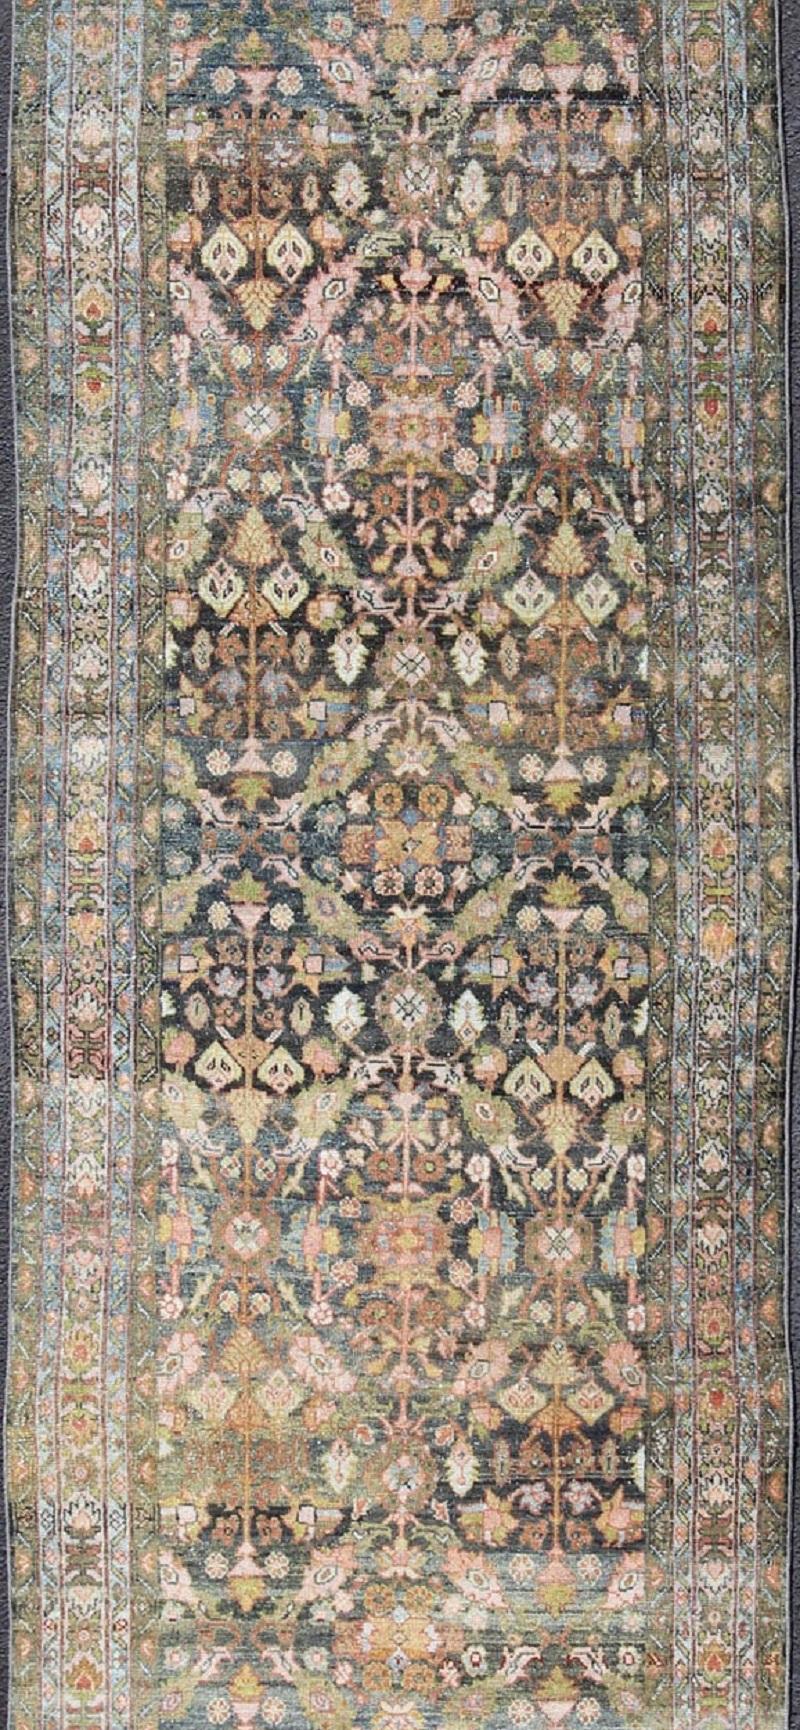 Tribal Colorful Antique Persian Hamedan Runner with All-Over Floral Design